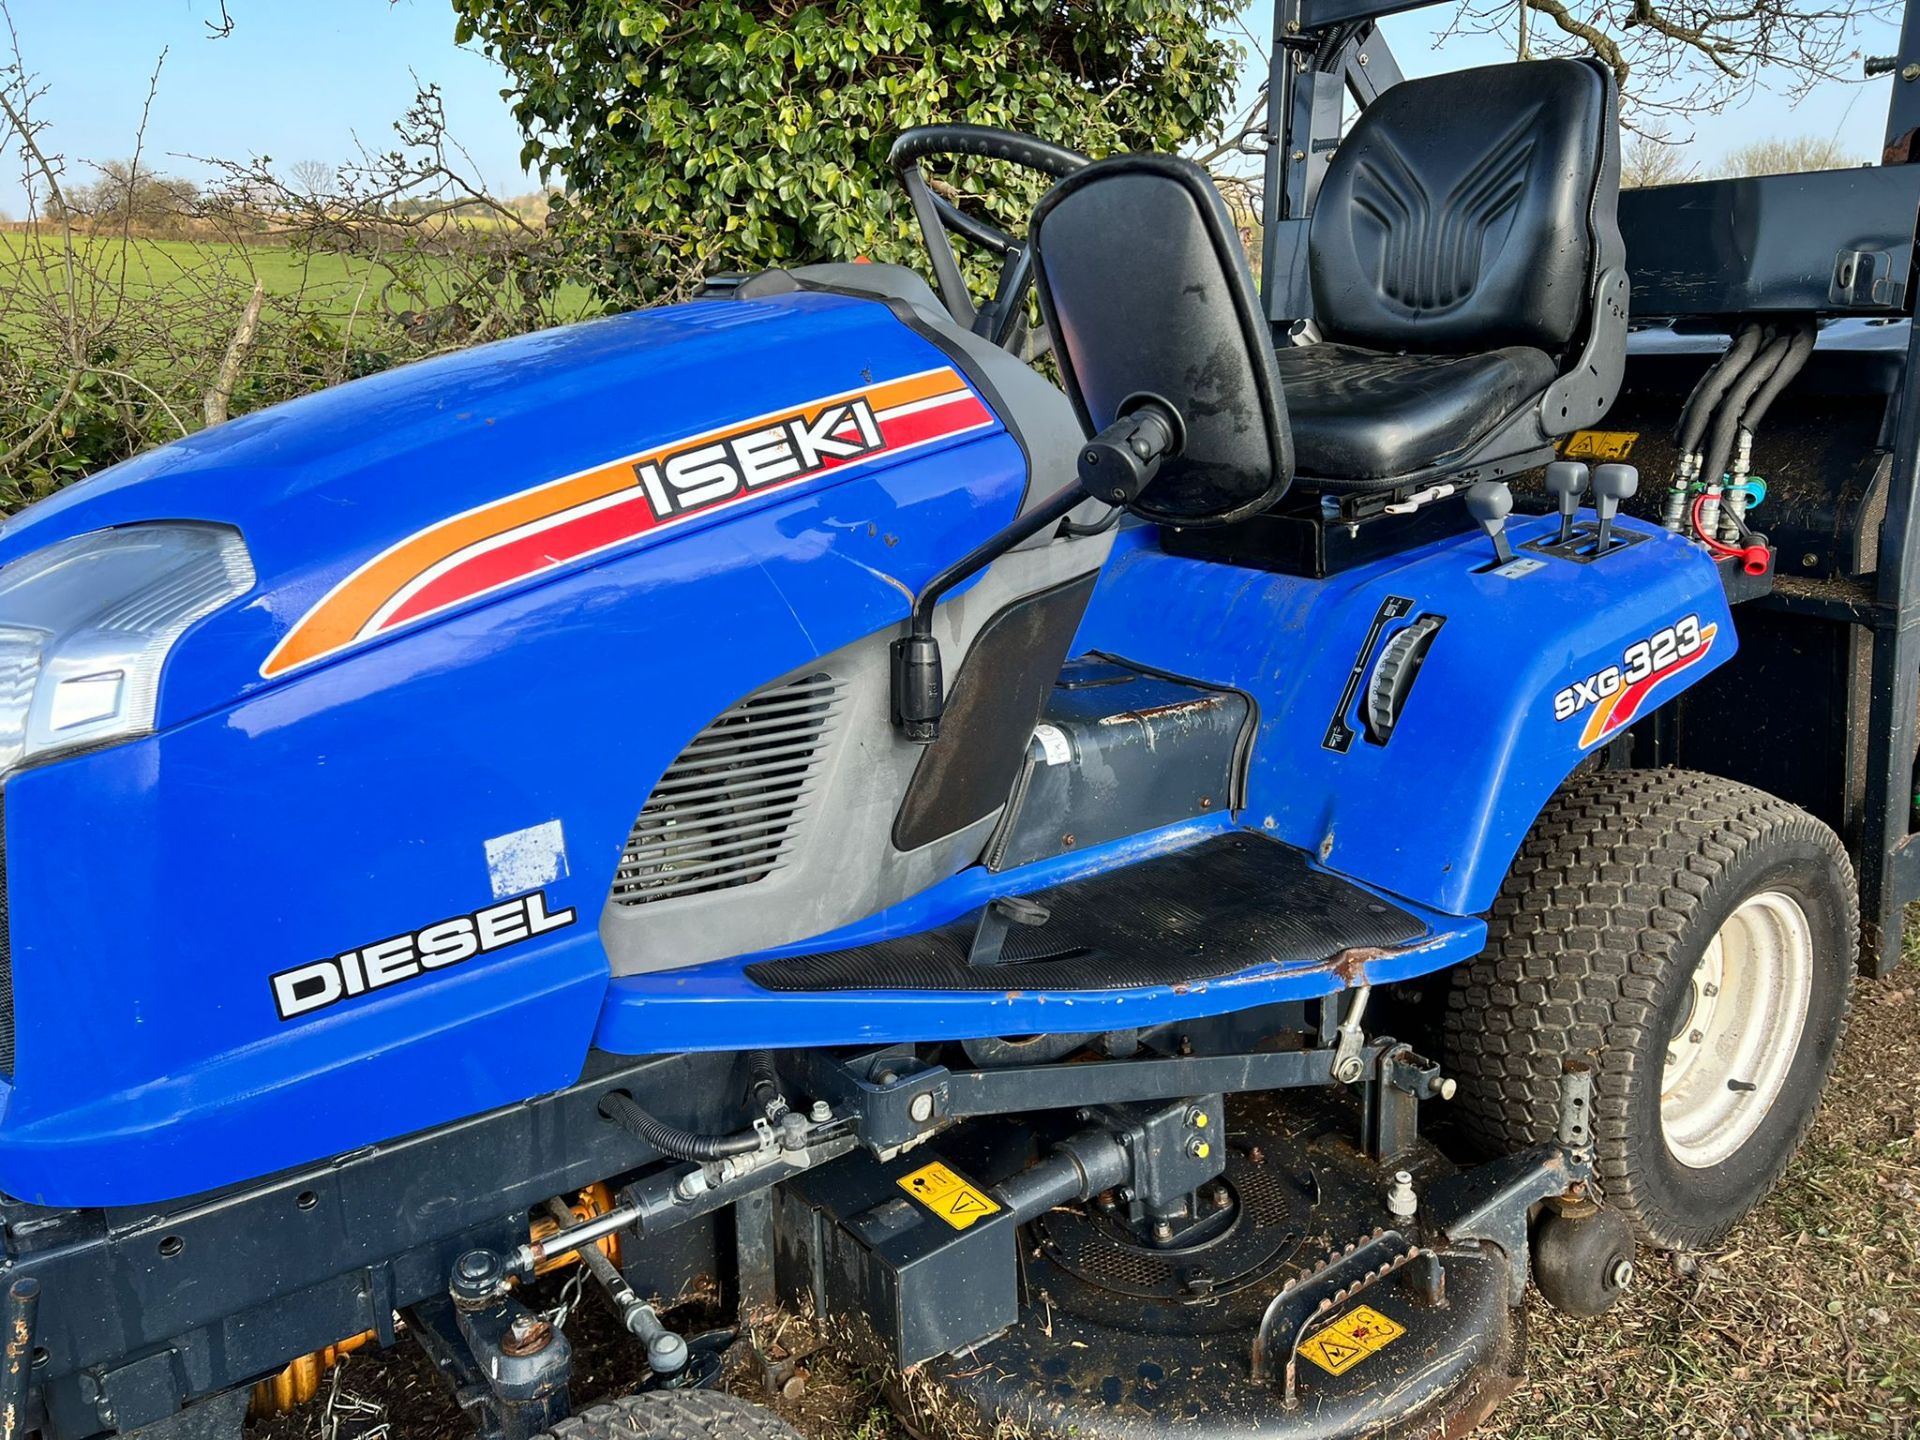 2012 Iseki SXG323 Diesel High Tip Ride On Mower, Runs Drives Cuts And Collects *PLUS VAT* - Image 11 of 15